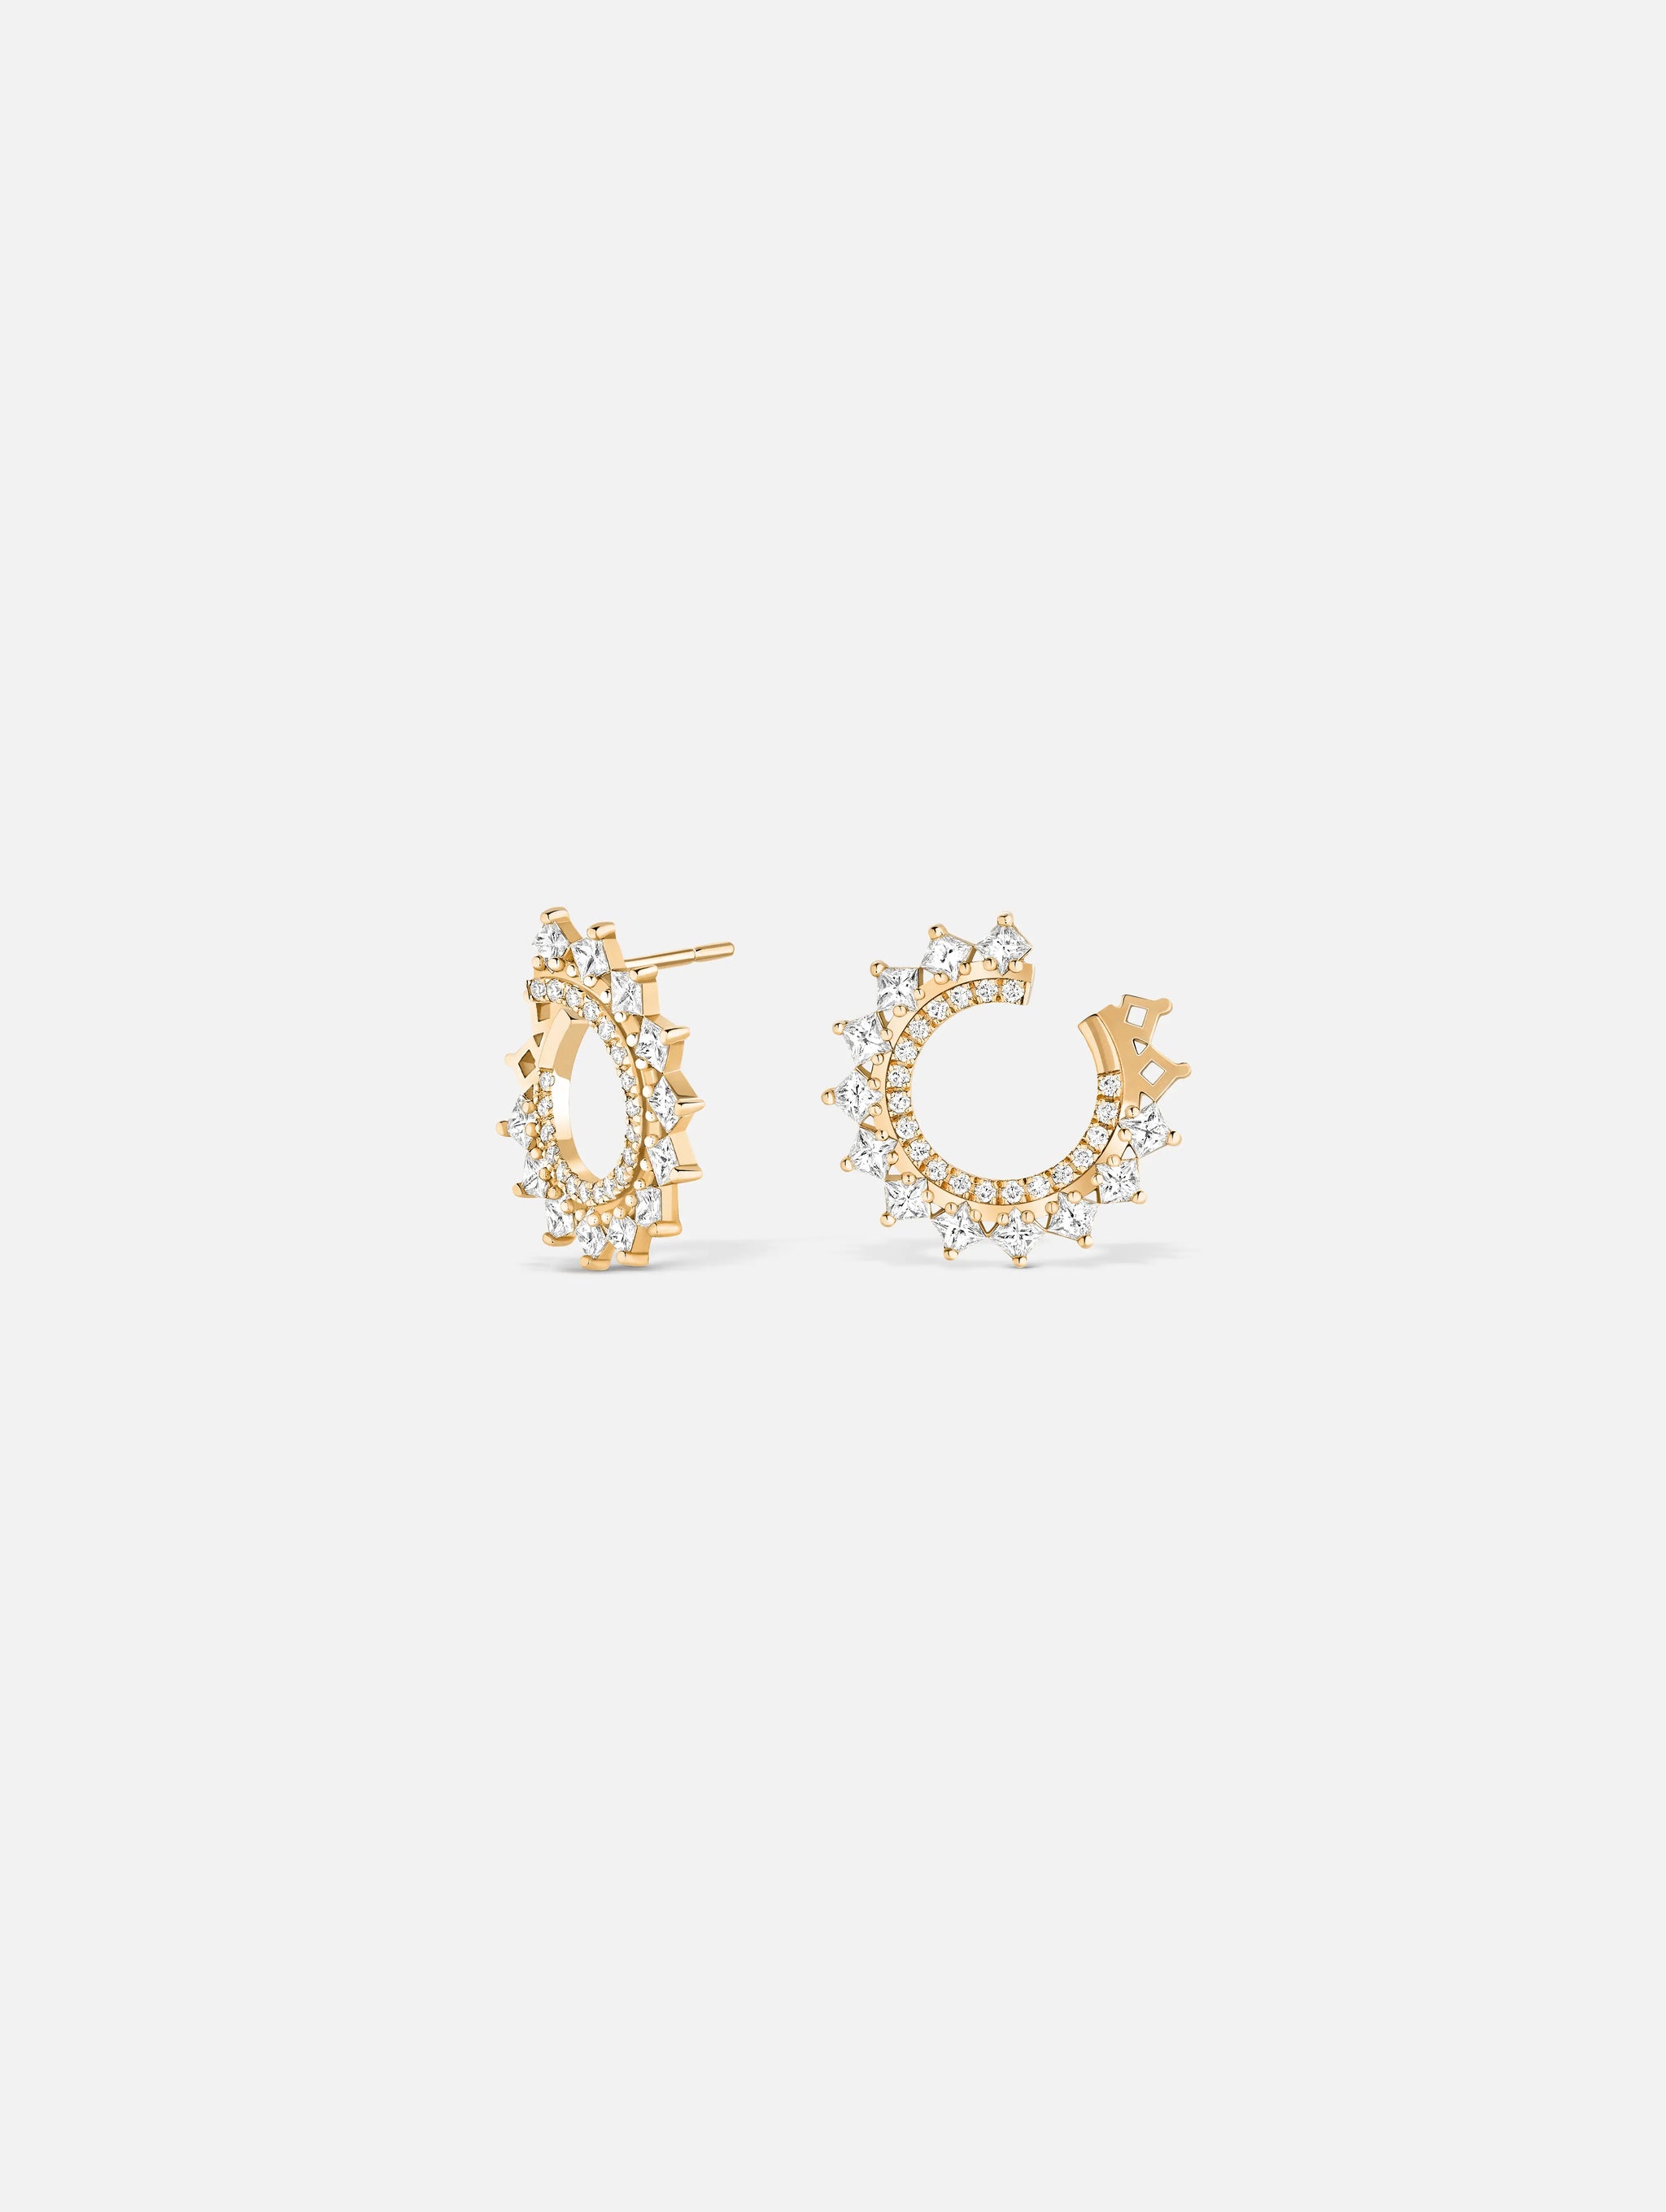 Princess Diamond Earrings in Yellow Gold - 1 - Nouvel Heritage